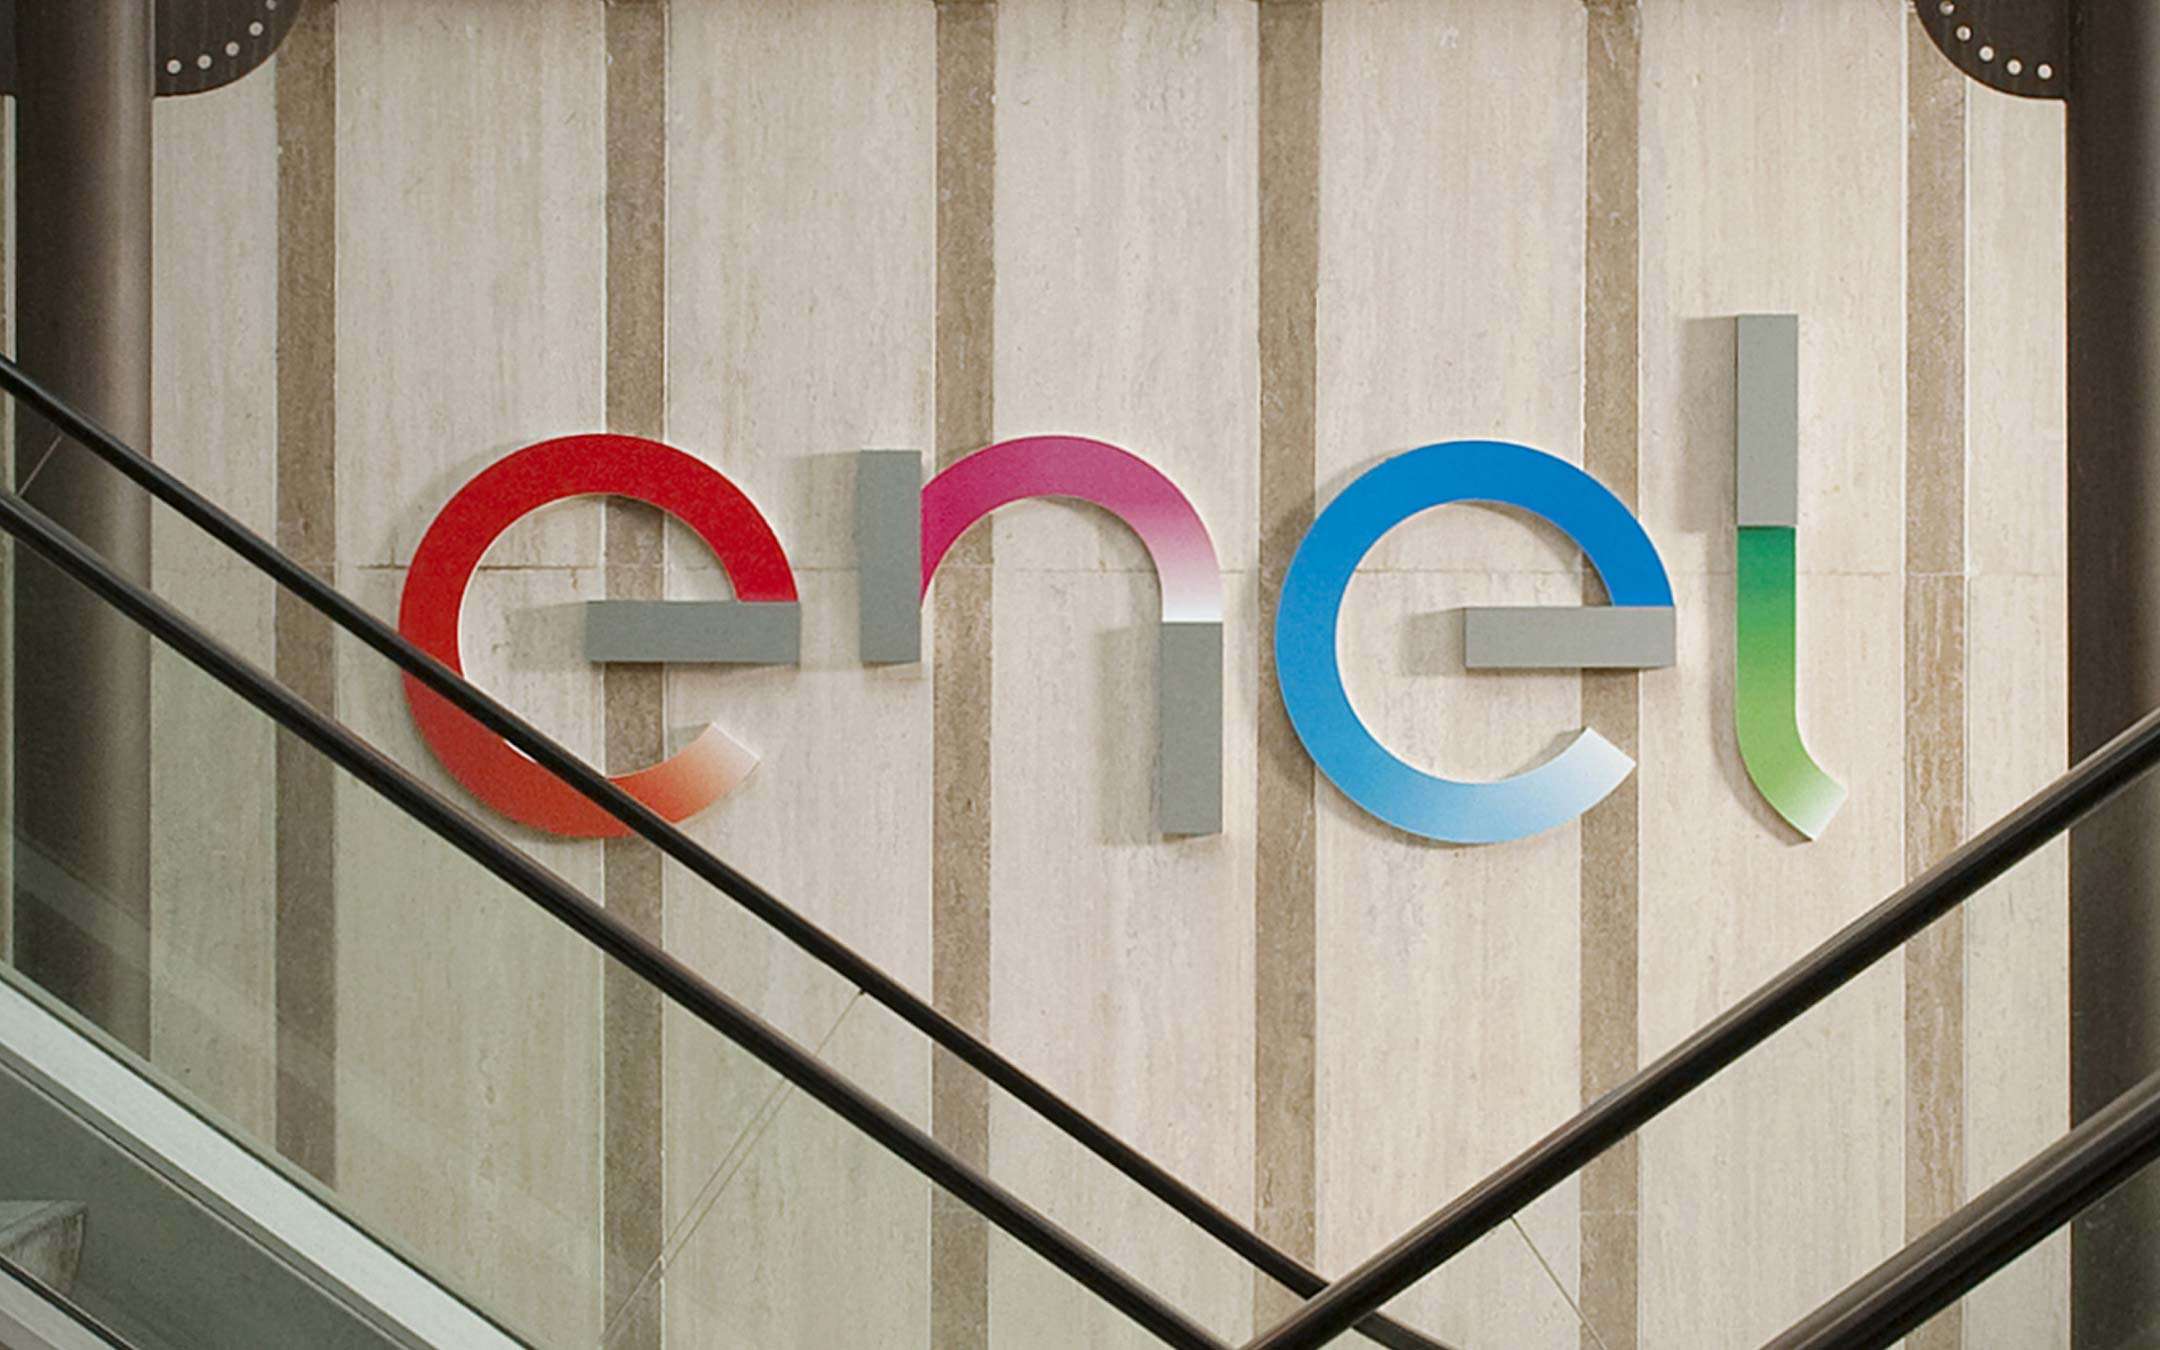 Enel under ransomware attack: 14 million asked